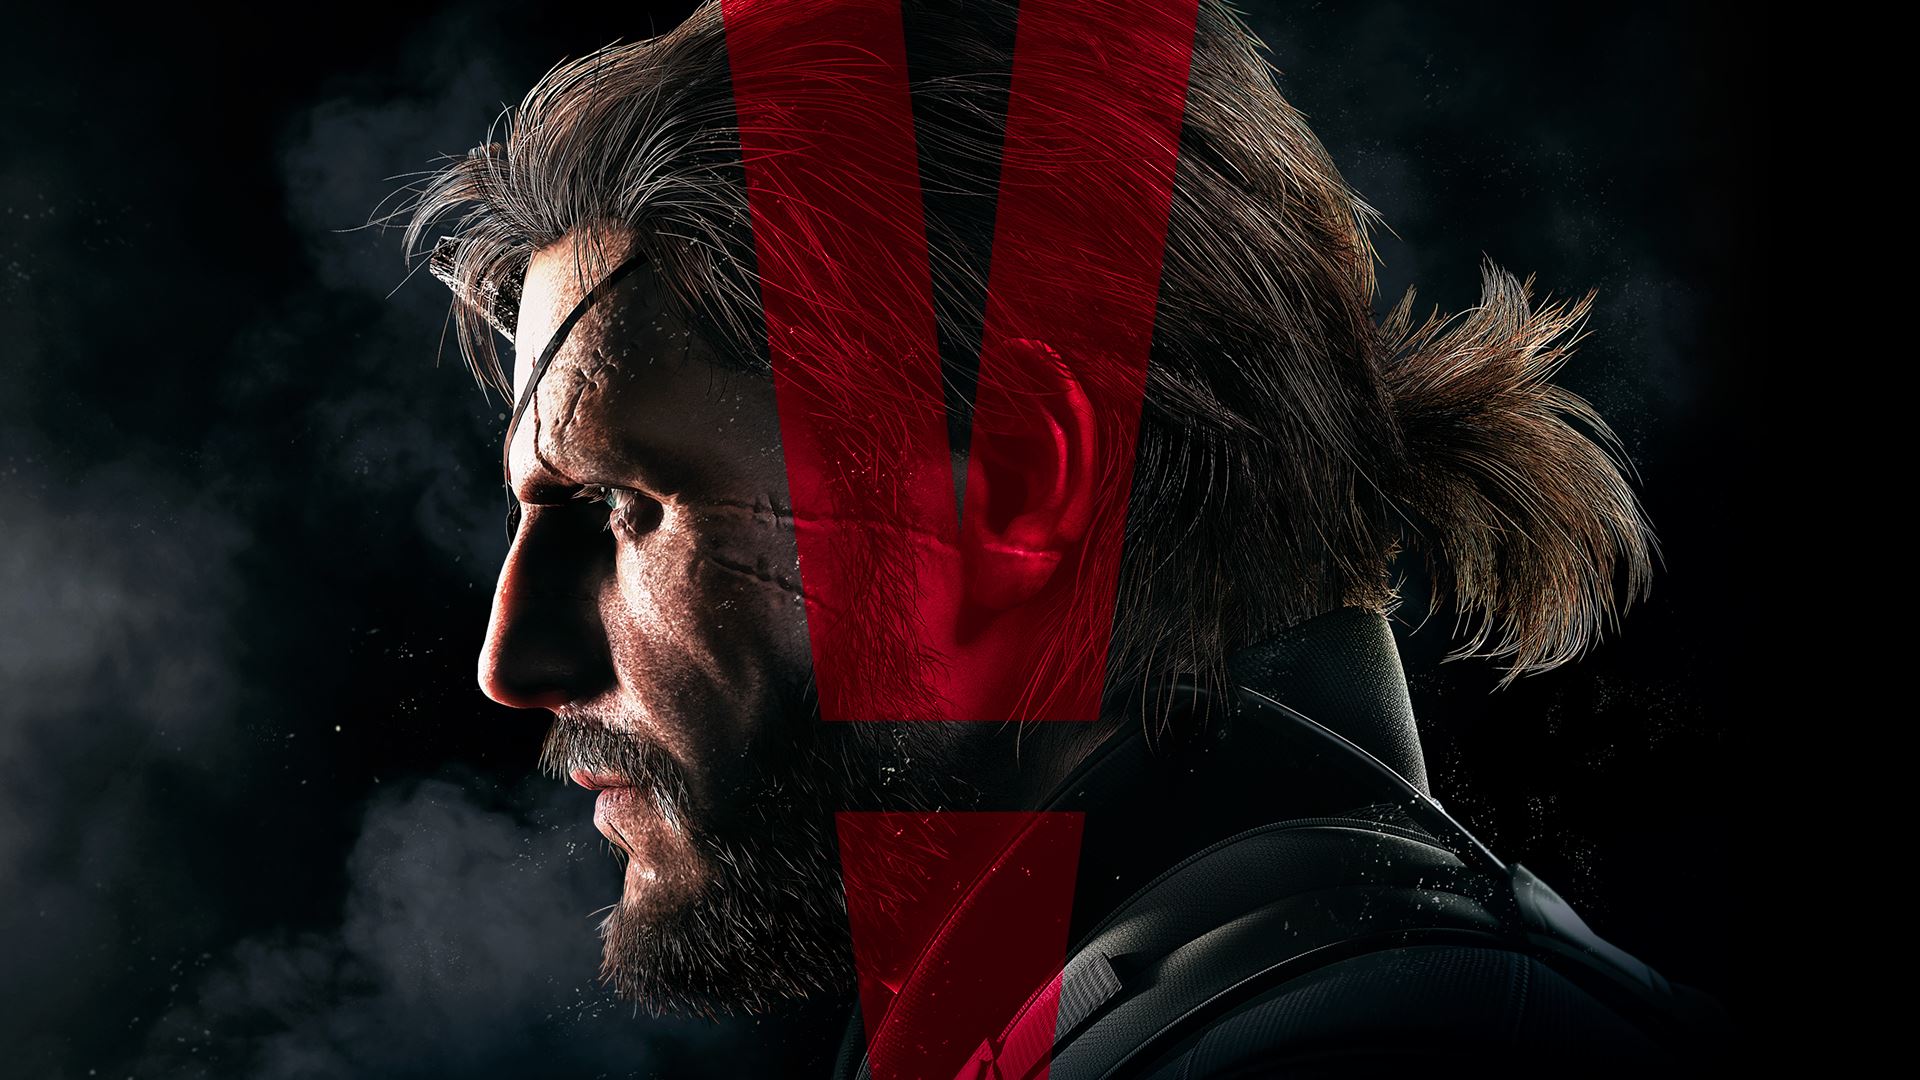 Metal Gear Solid V: The Phantom Pain PC system requirements